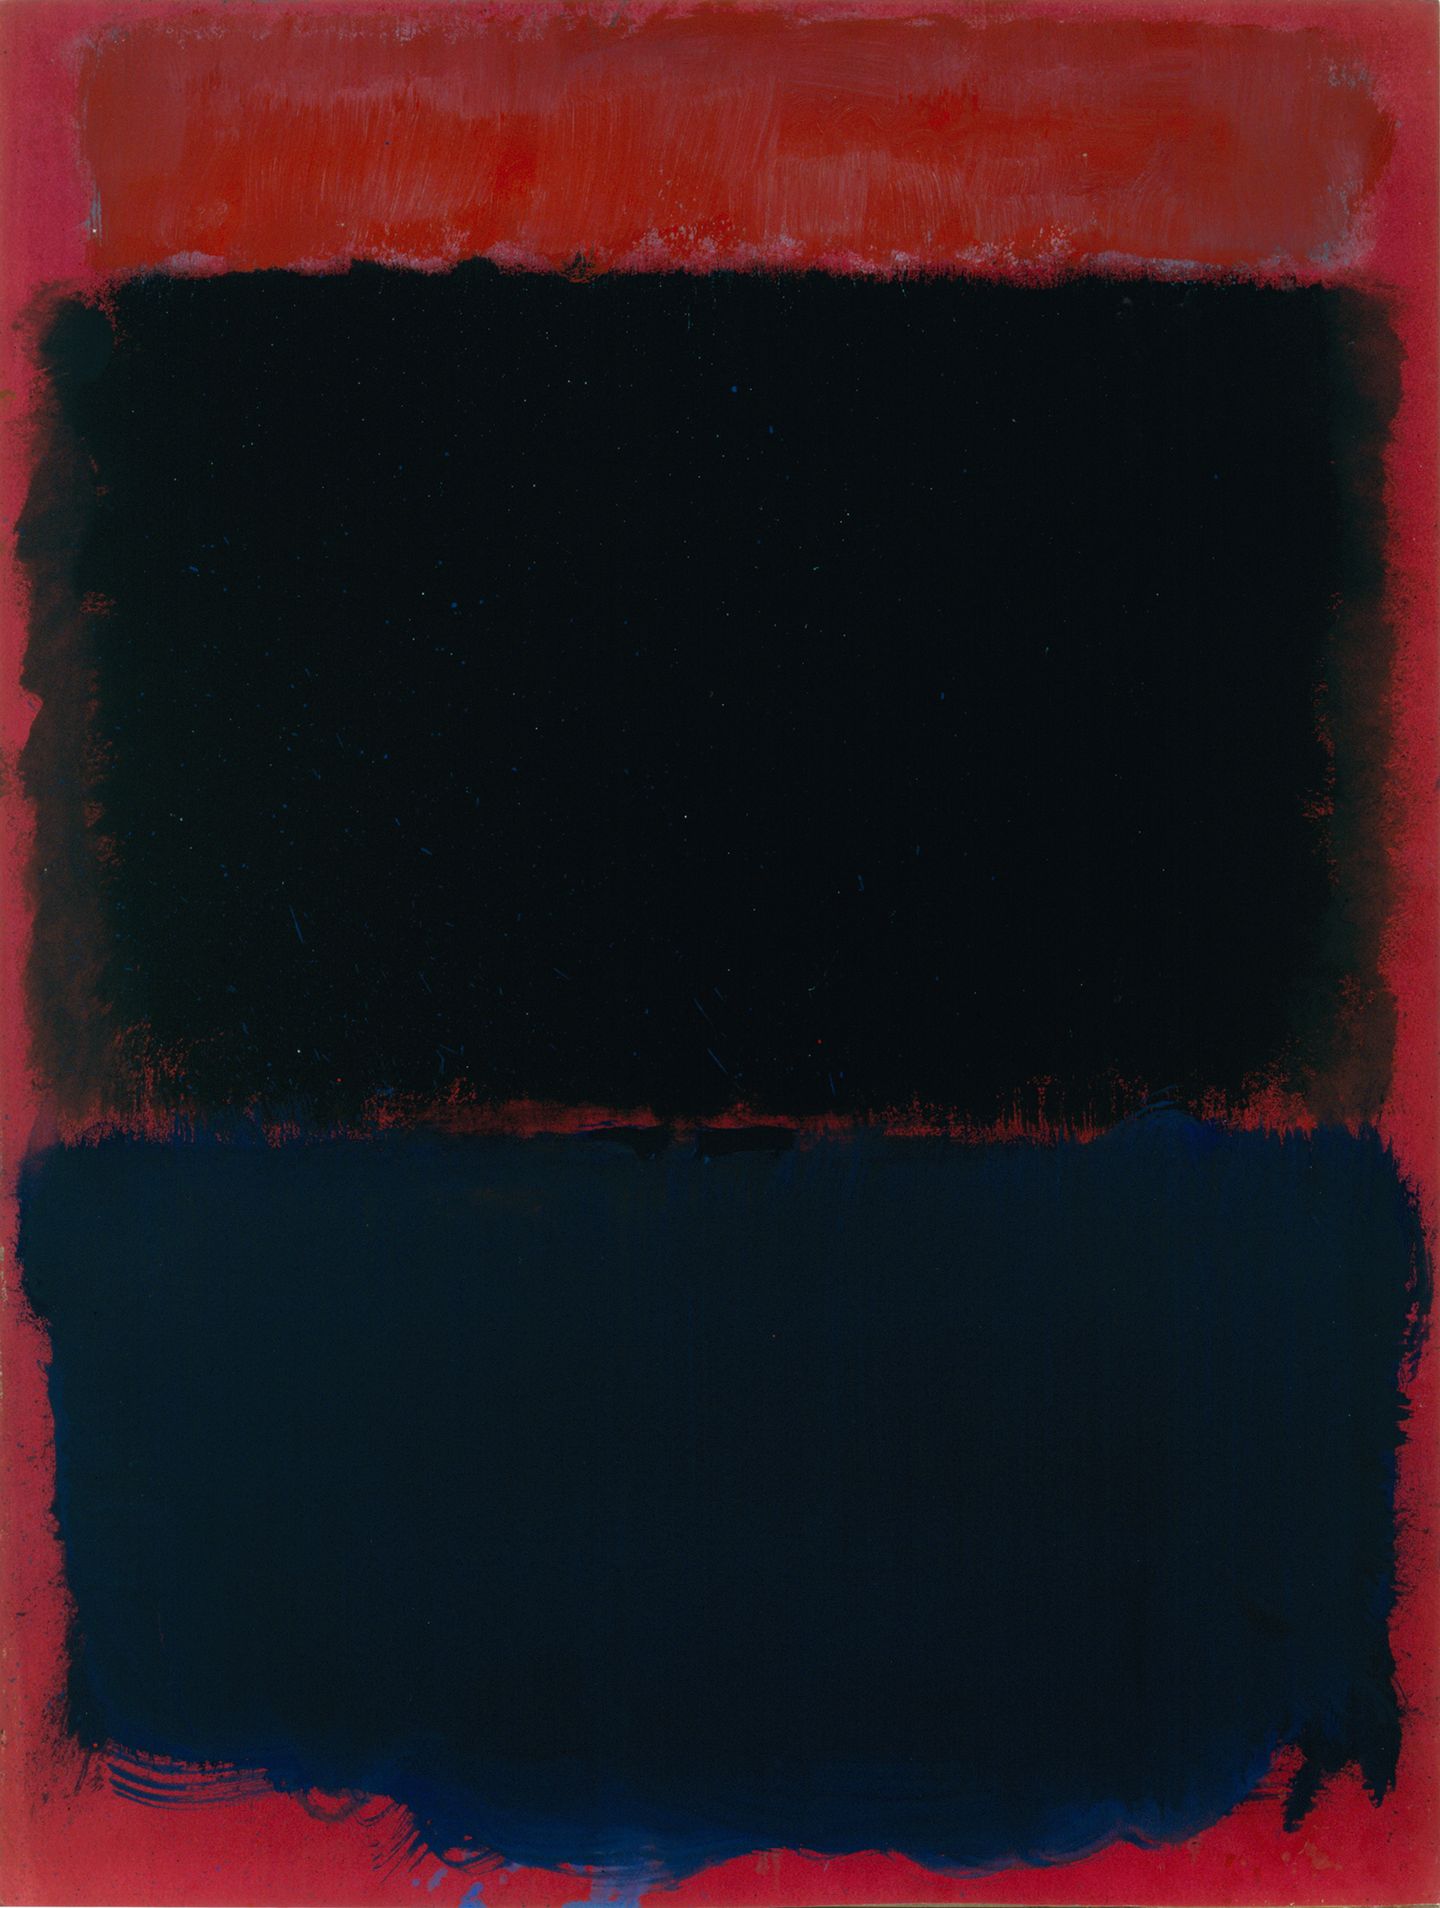 Mark Rothko, Untitled (c. 1959/1968). Tempera on paper drawing board mounted on canvas. 71.9 cm × 54 cm. © Kate Rothko Prizel and Christopher Rothko. Courtesy Pace Gallery.